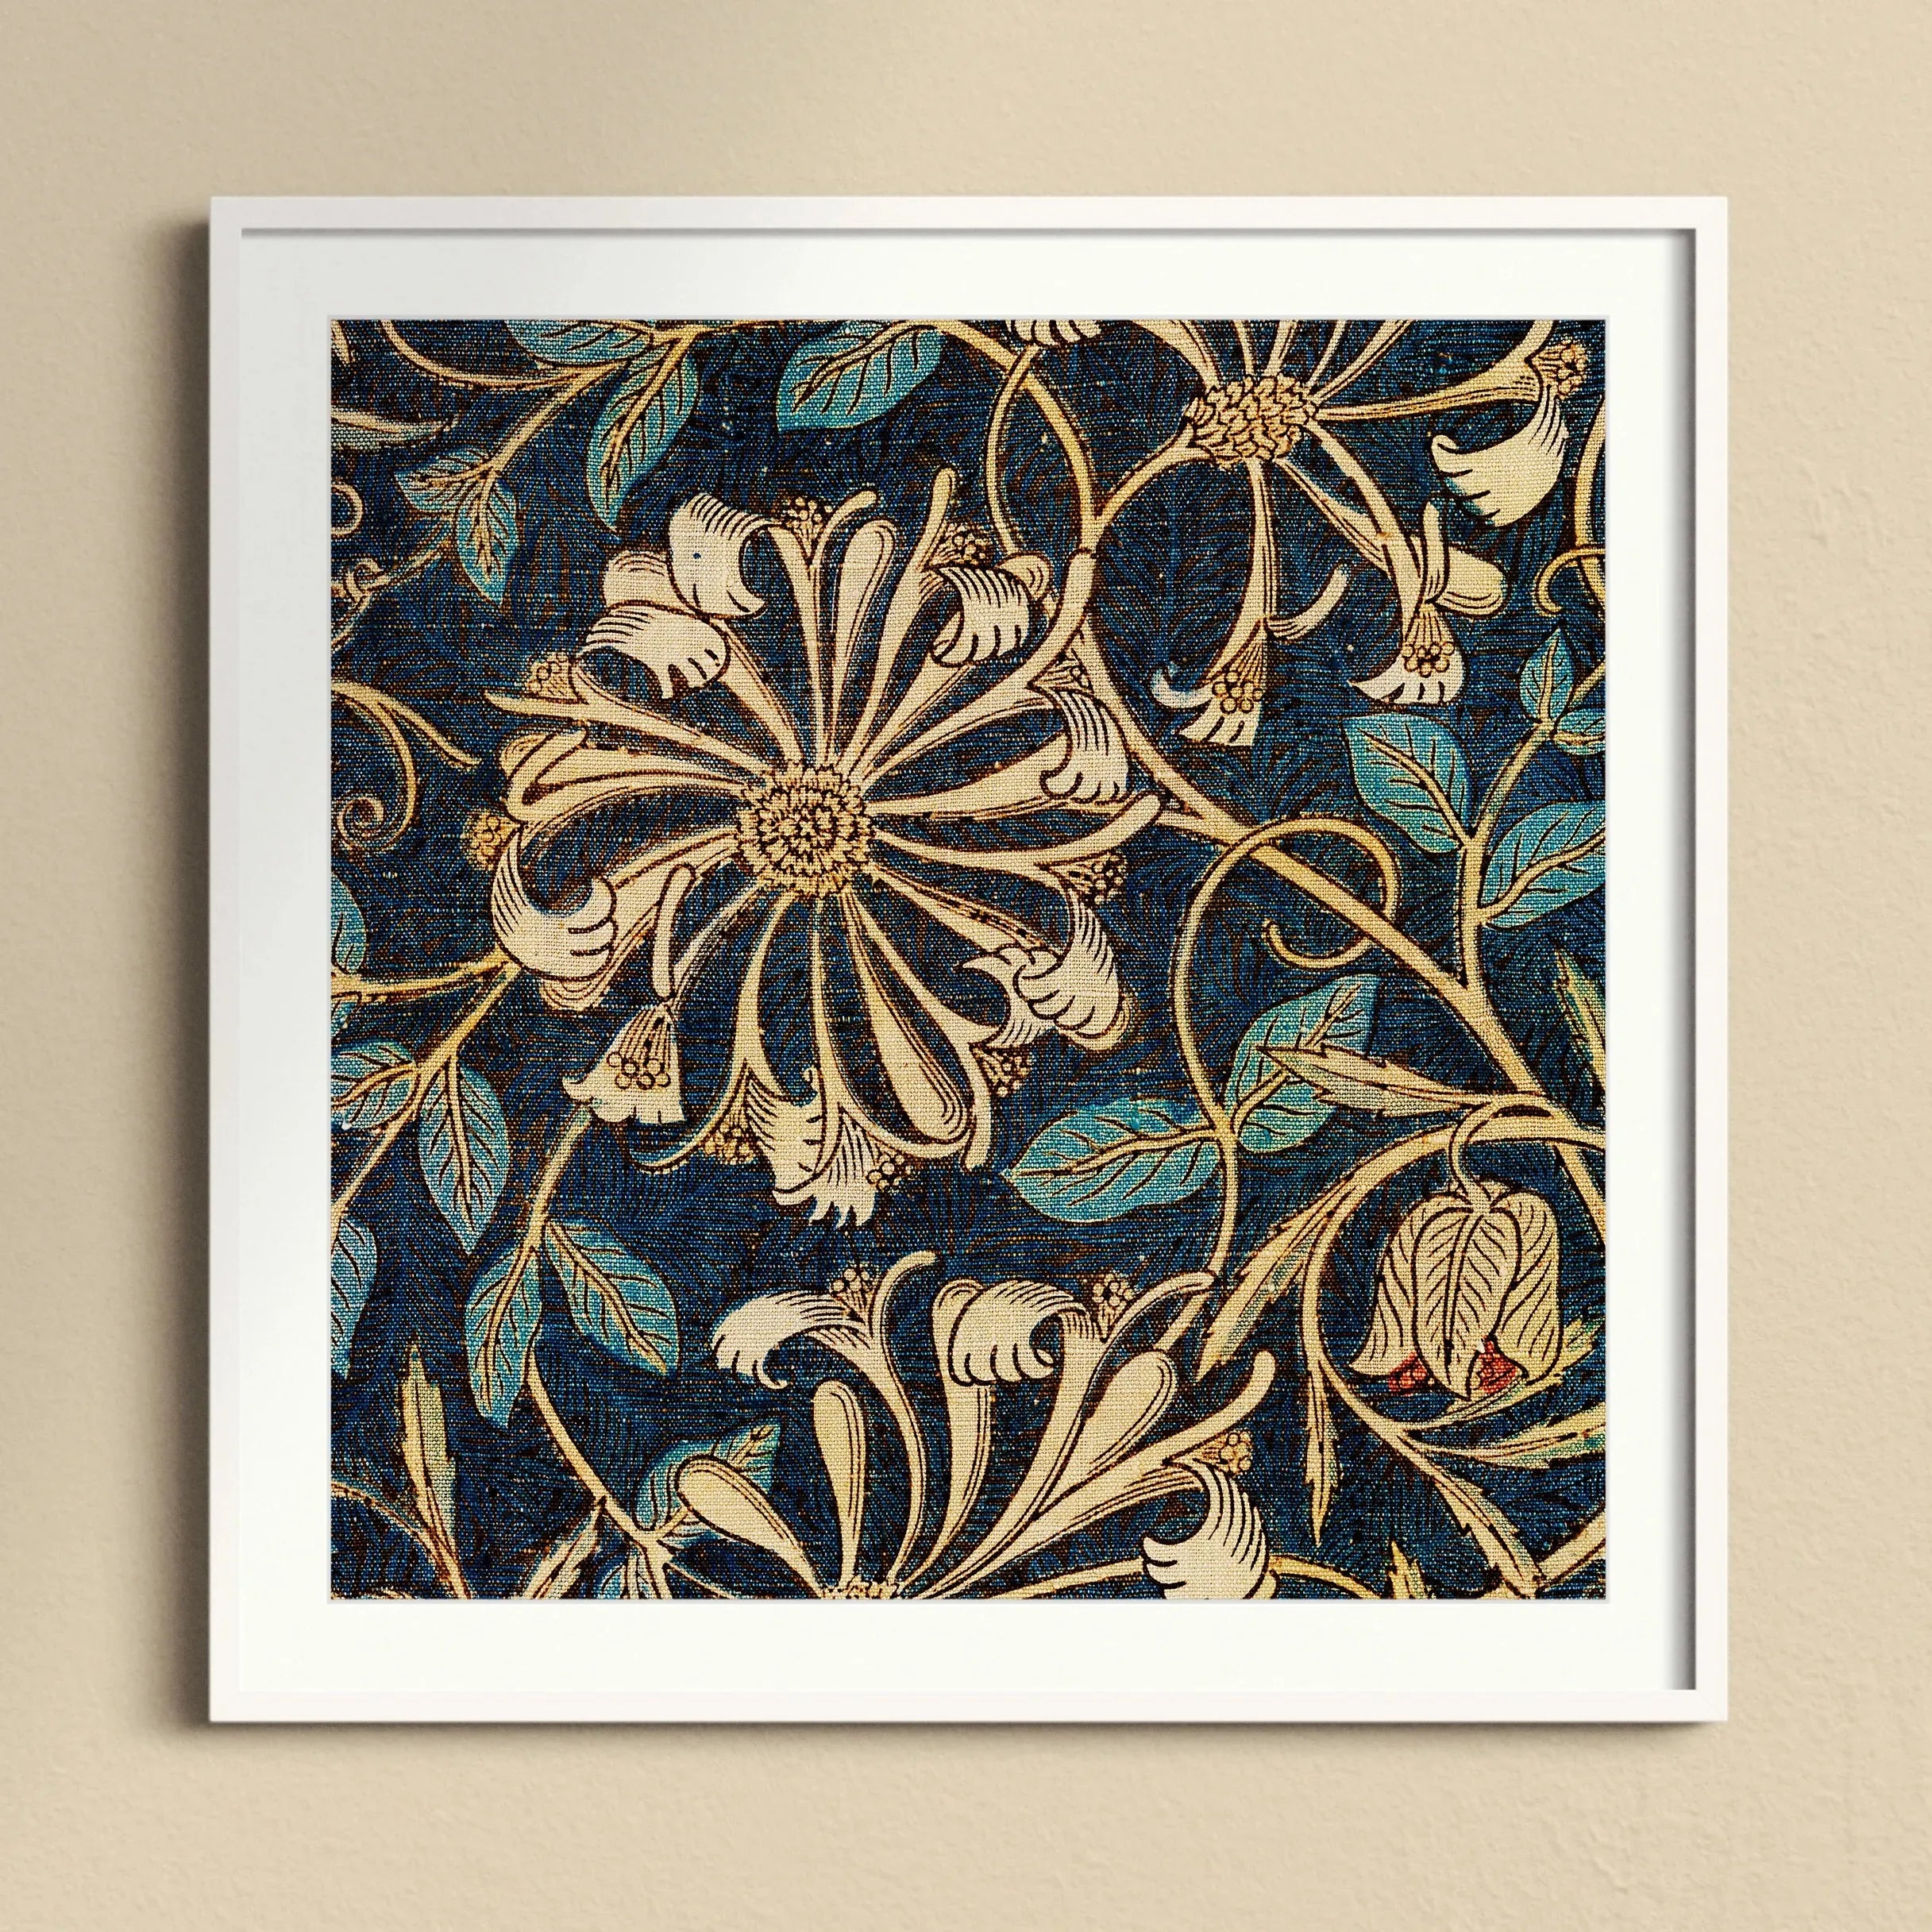 Honeysuckle By William Morris Framed & Mounted Print - 12’x12’ / White Frame - Posters Prints & Visual Artwork